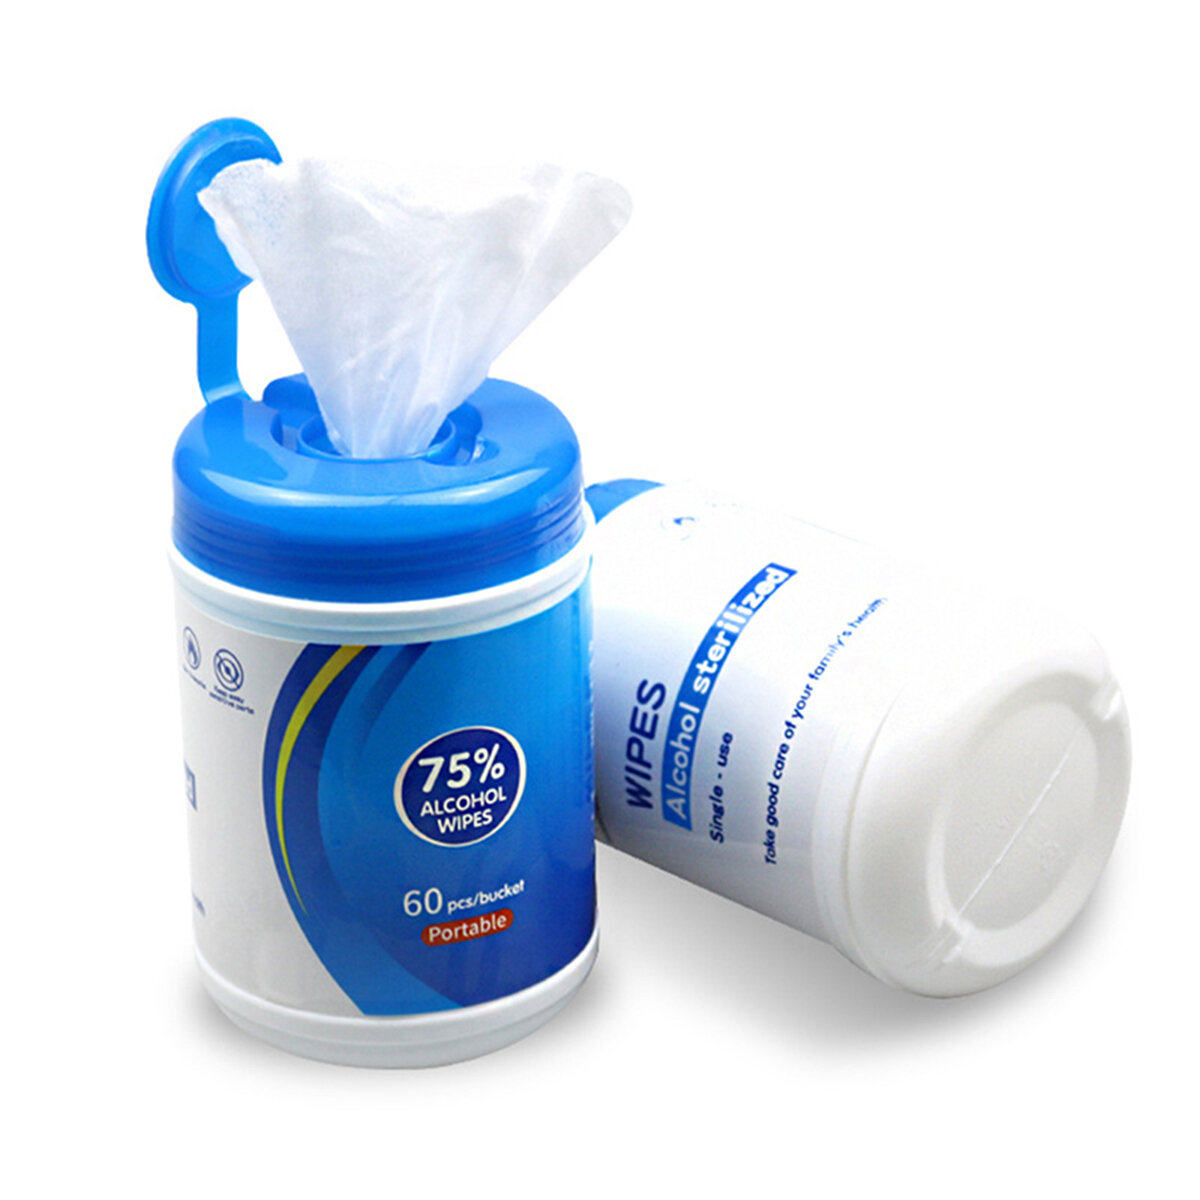 

60Pcs Portable 75% Alcohol Wet Wipes Bucket Antiseptic Cleaner Disposable Tissue Sterilization